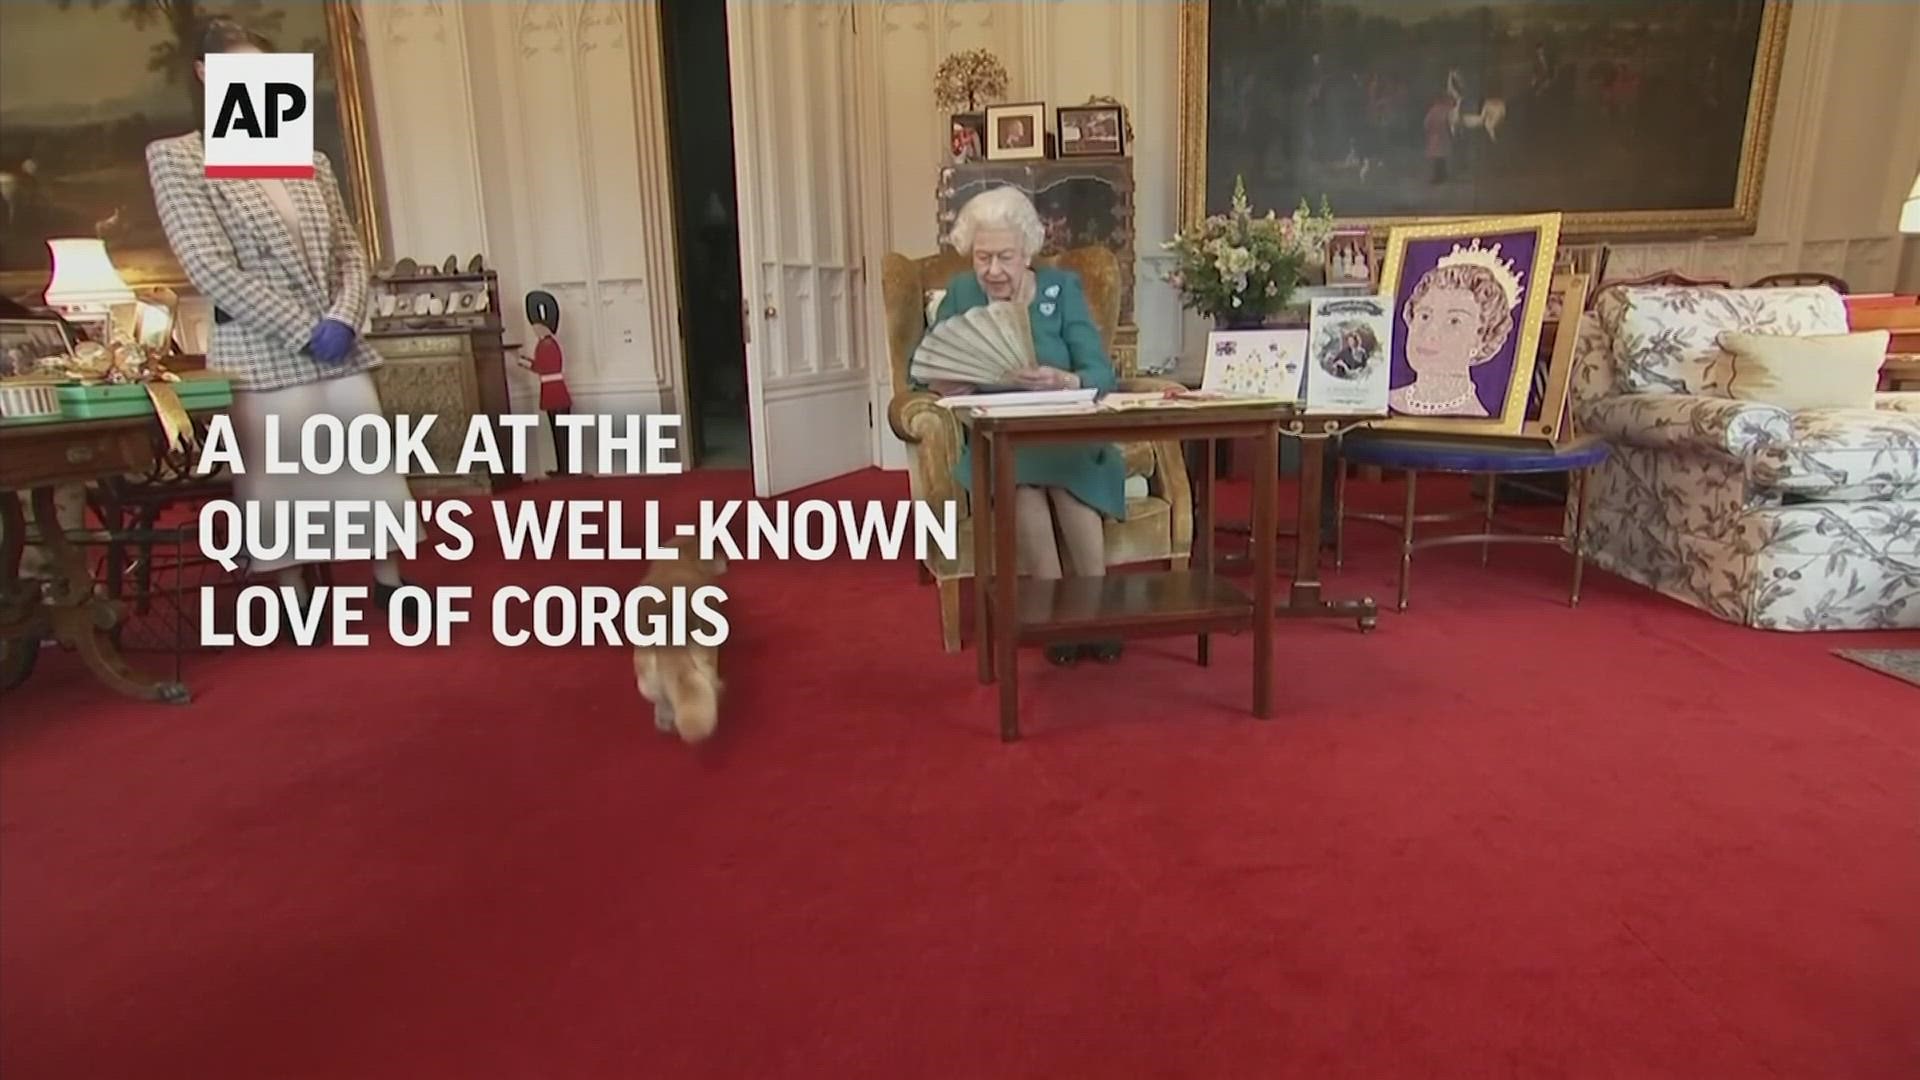 The late monarch owned nearly 30 corgis throughout her life, and they enjoyed a life of privilege fit for a royal pet.